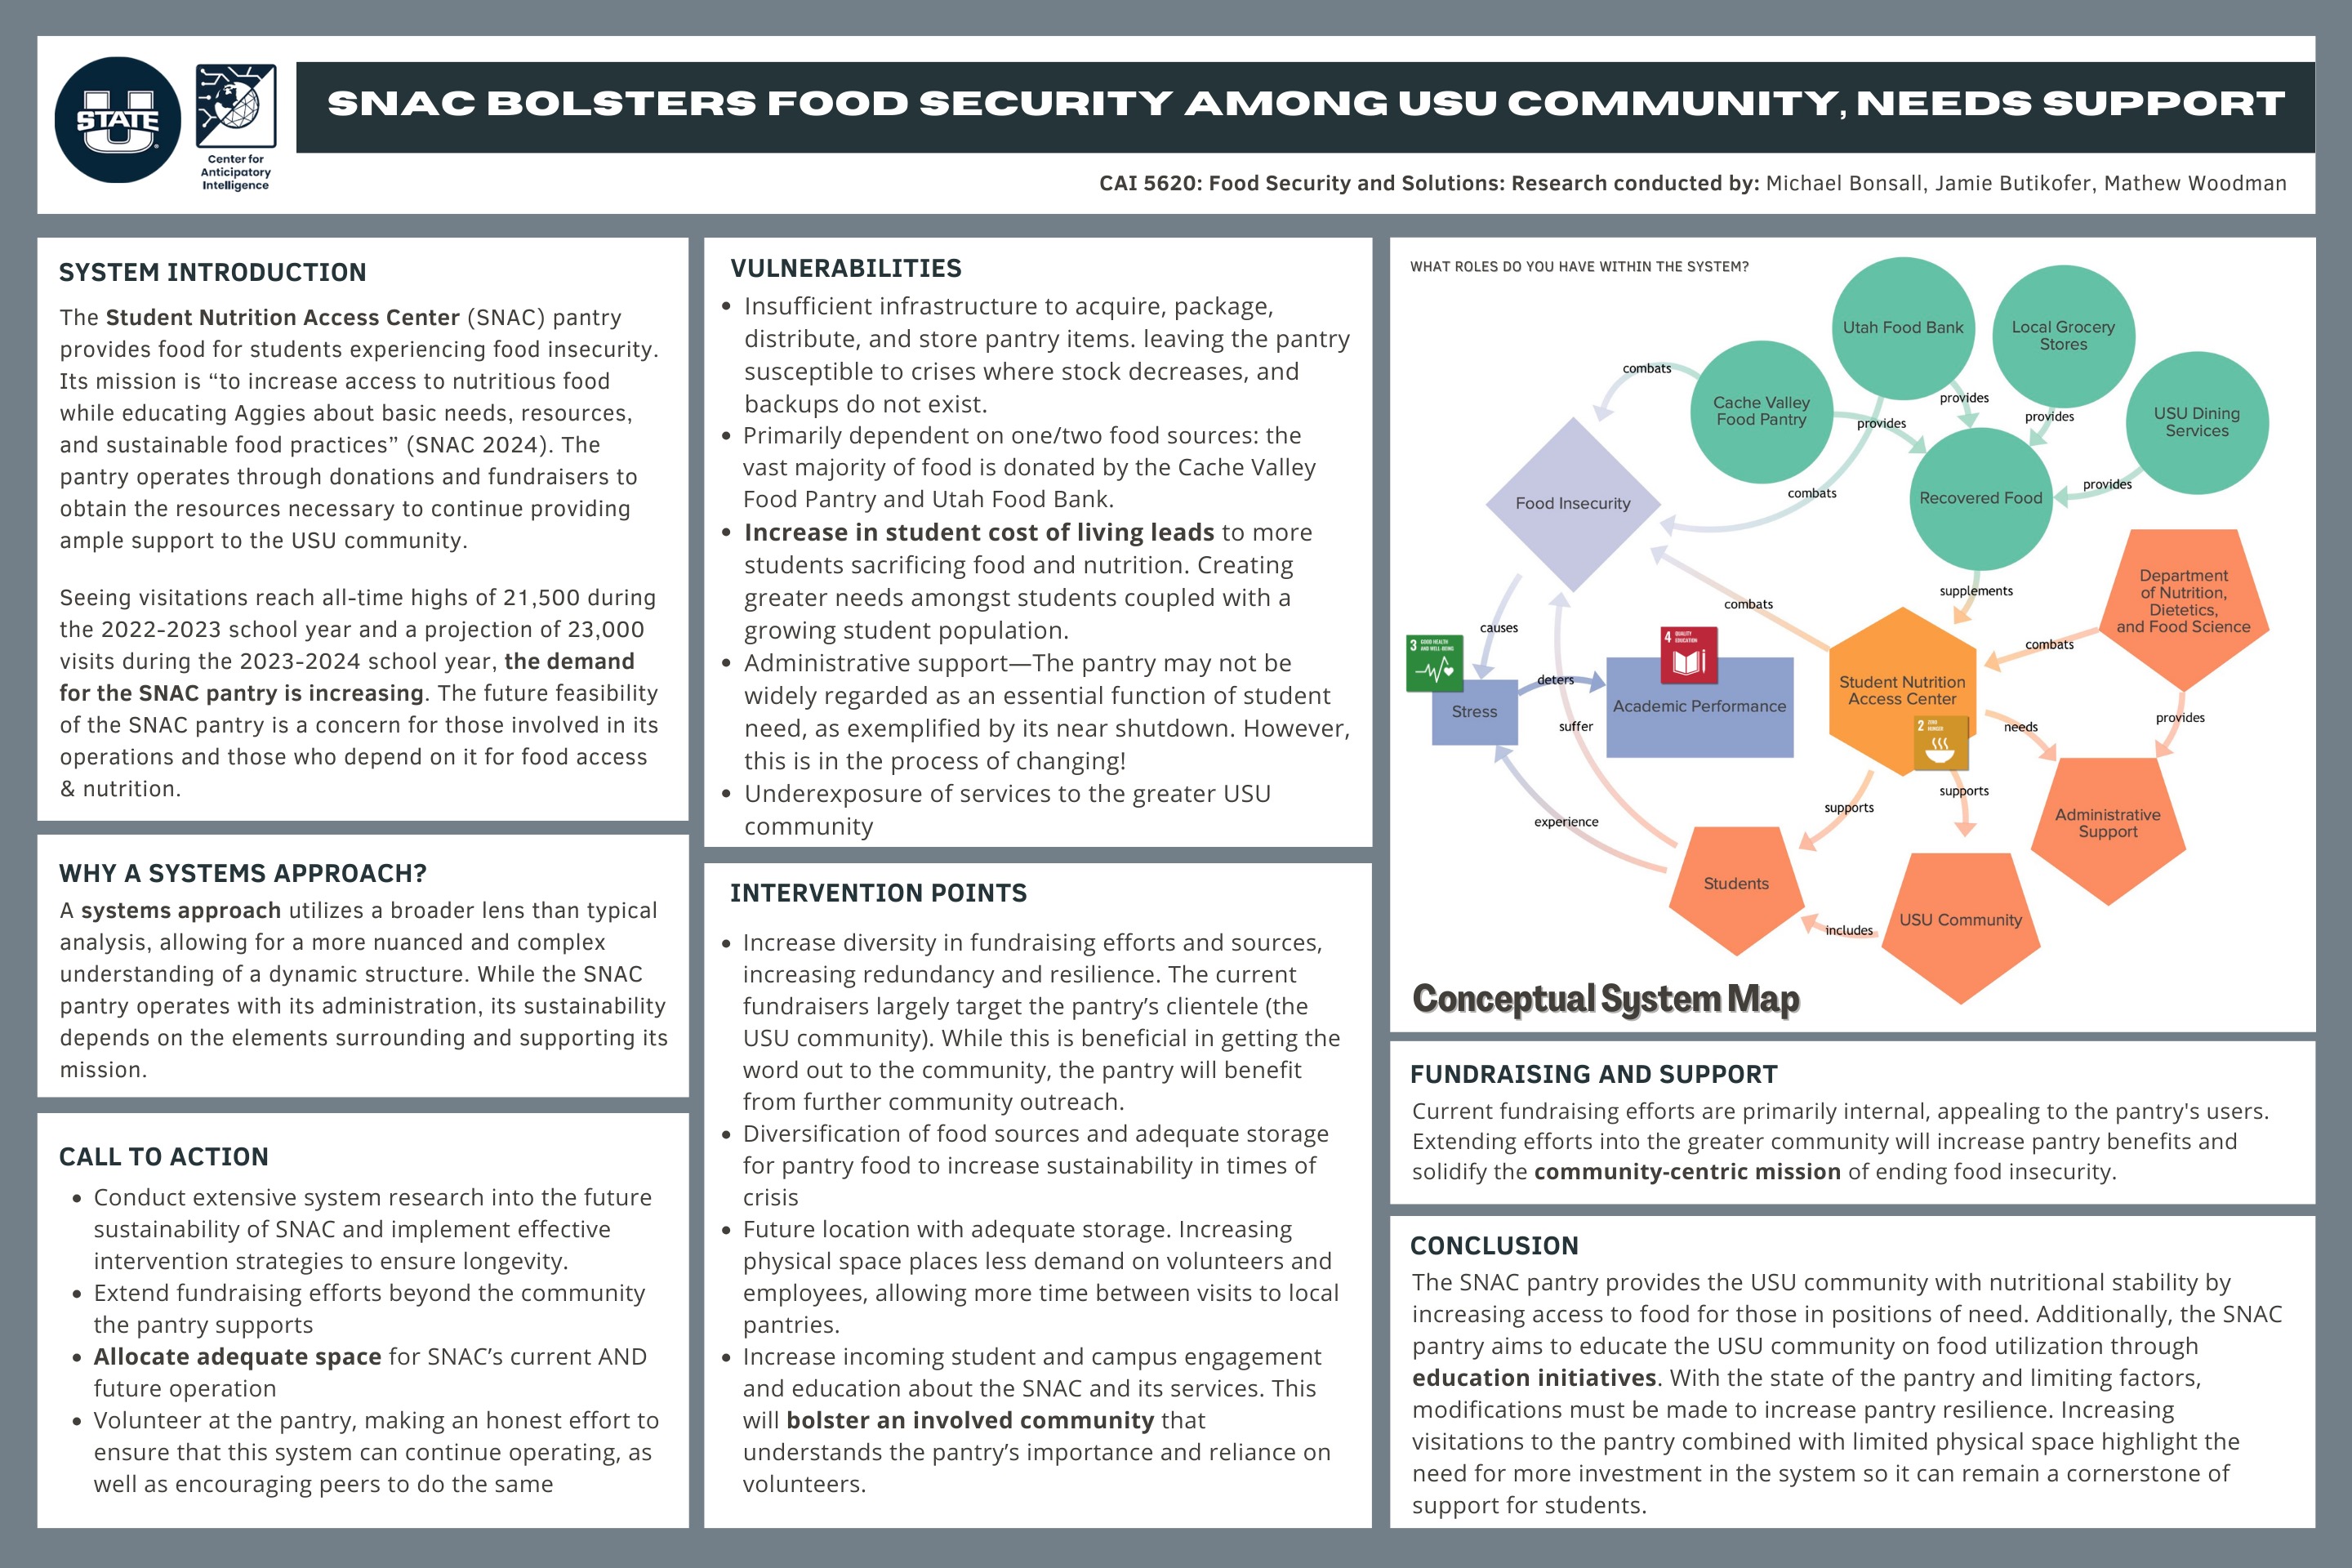 A systems approach utilized a broader lens than typical analysis, allowing for a more nuanced and complex understanding of a dynamic structure. While the SNAC pantry operates with its administration, its sustainability depends on the elements surrounding and supporting its mission. 